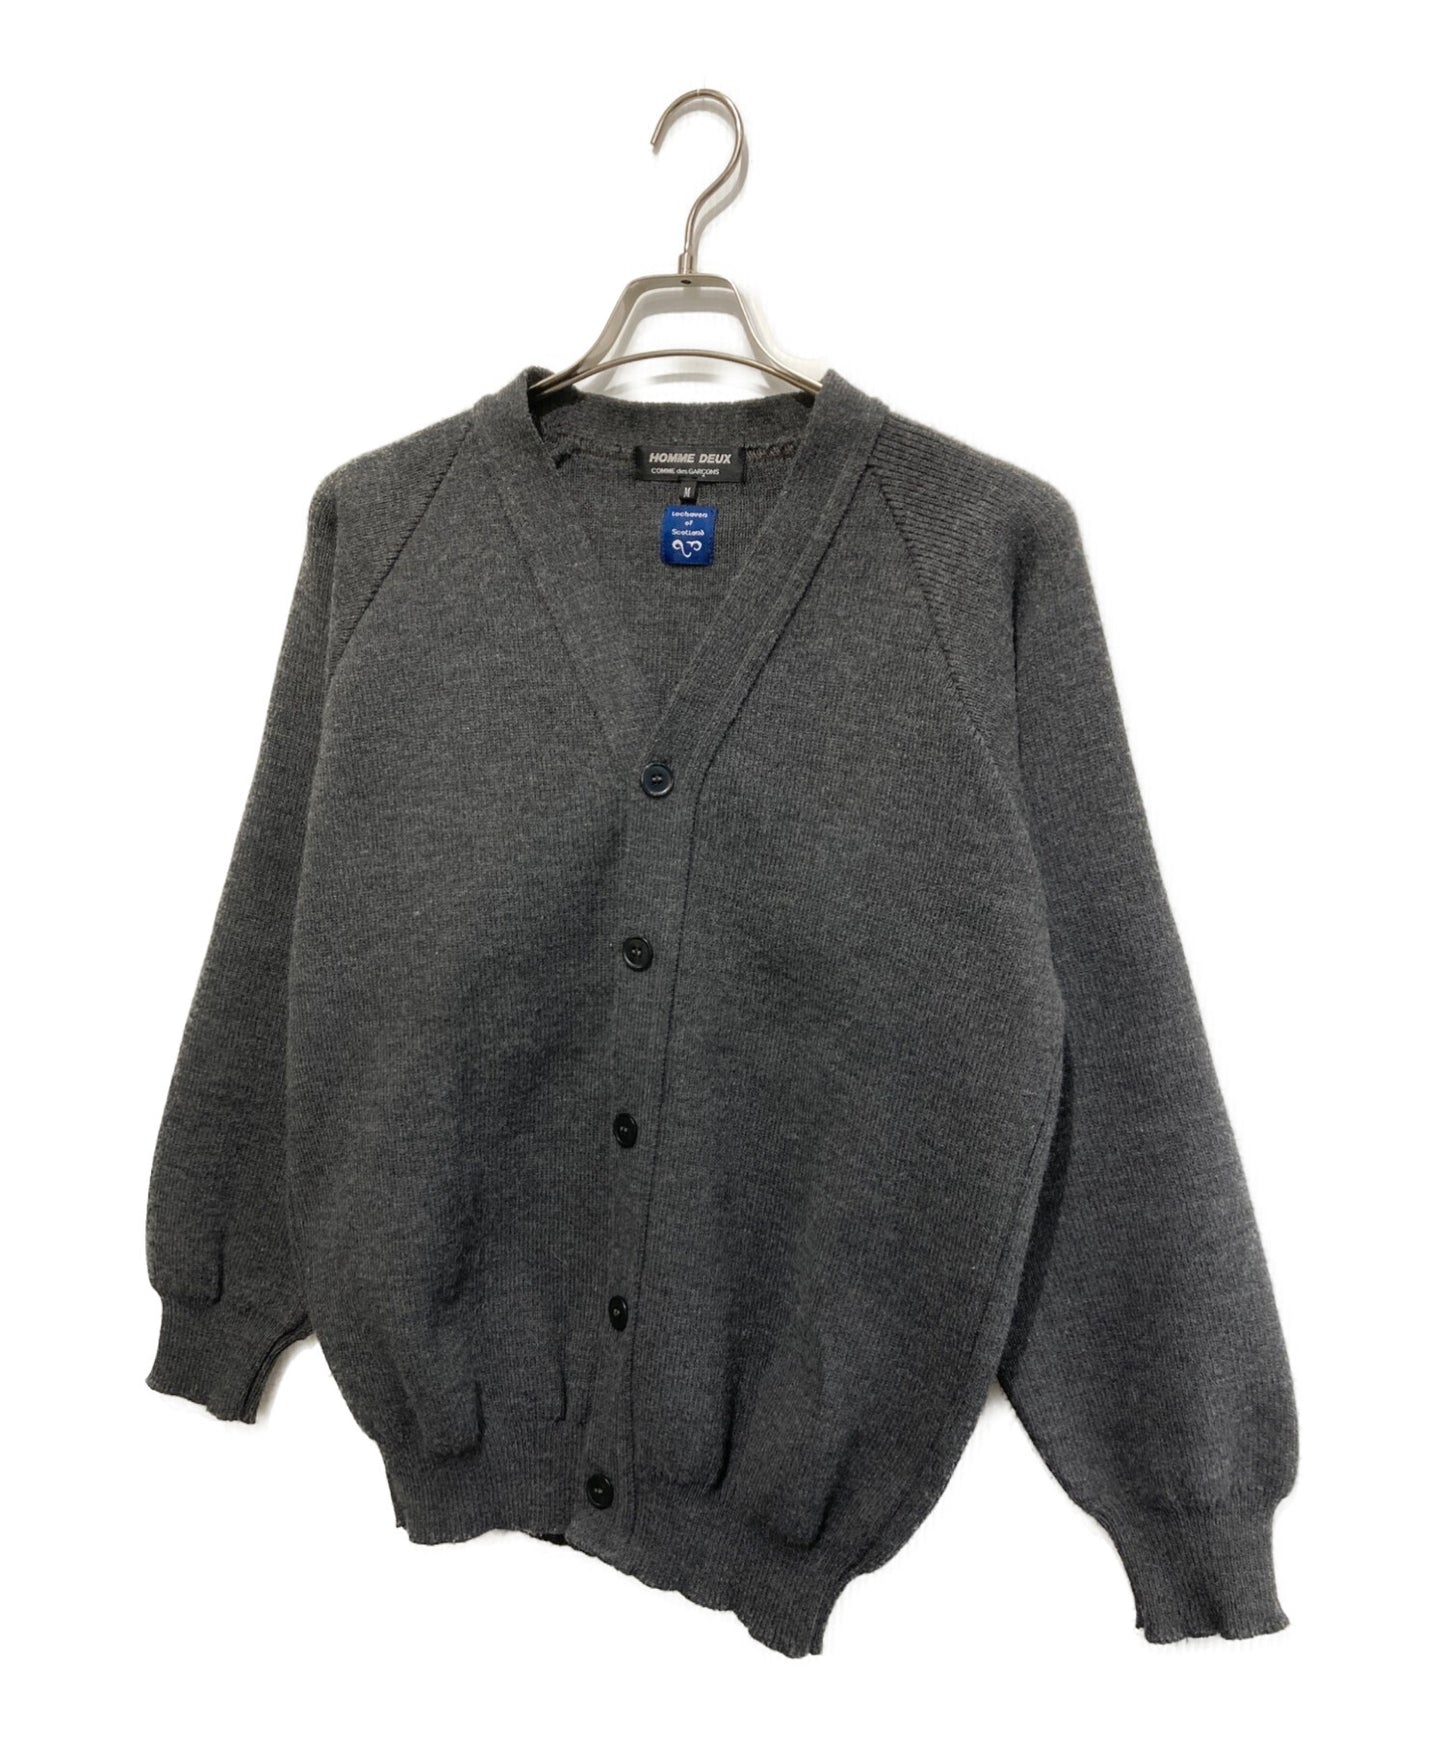 [Pre-owned] COMME des GARCONS HOMME DEUX V-Neck Knit Cardigan / Knitwear / Sweater DH-N501